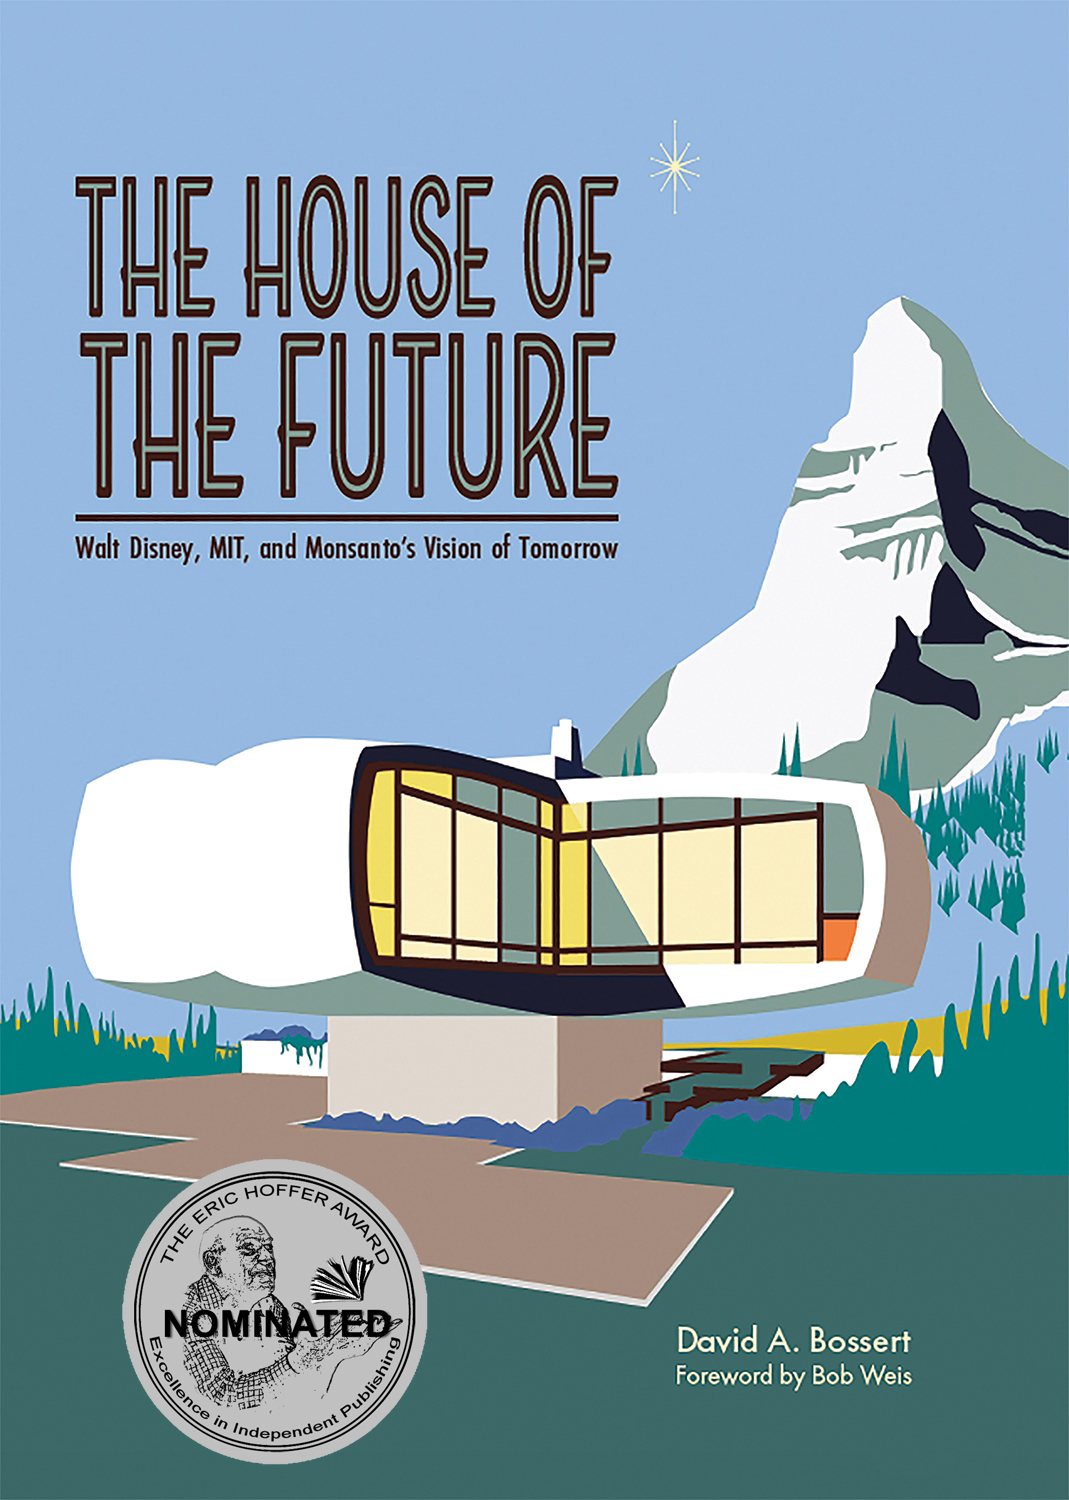 https://theoldmillpress.com/product/the-house-of-the-future-walt-disney-mit-and-monsantos-vision-of-tomorrow/